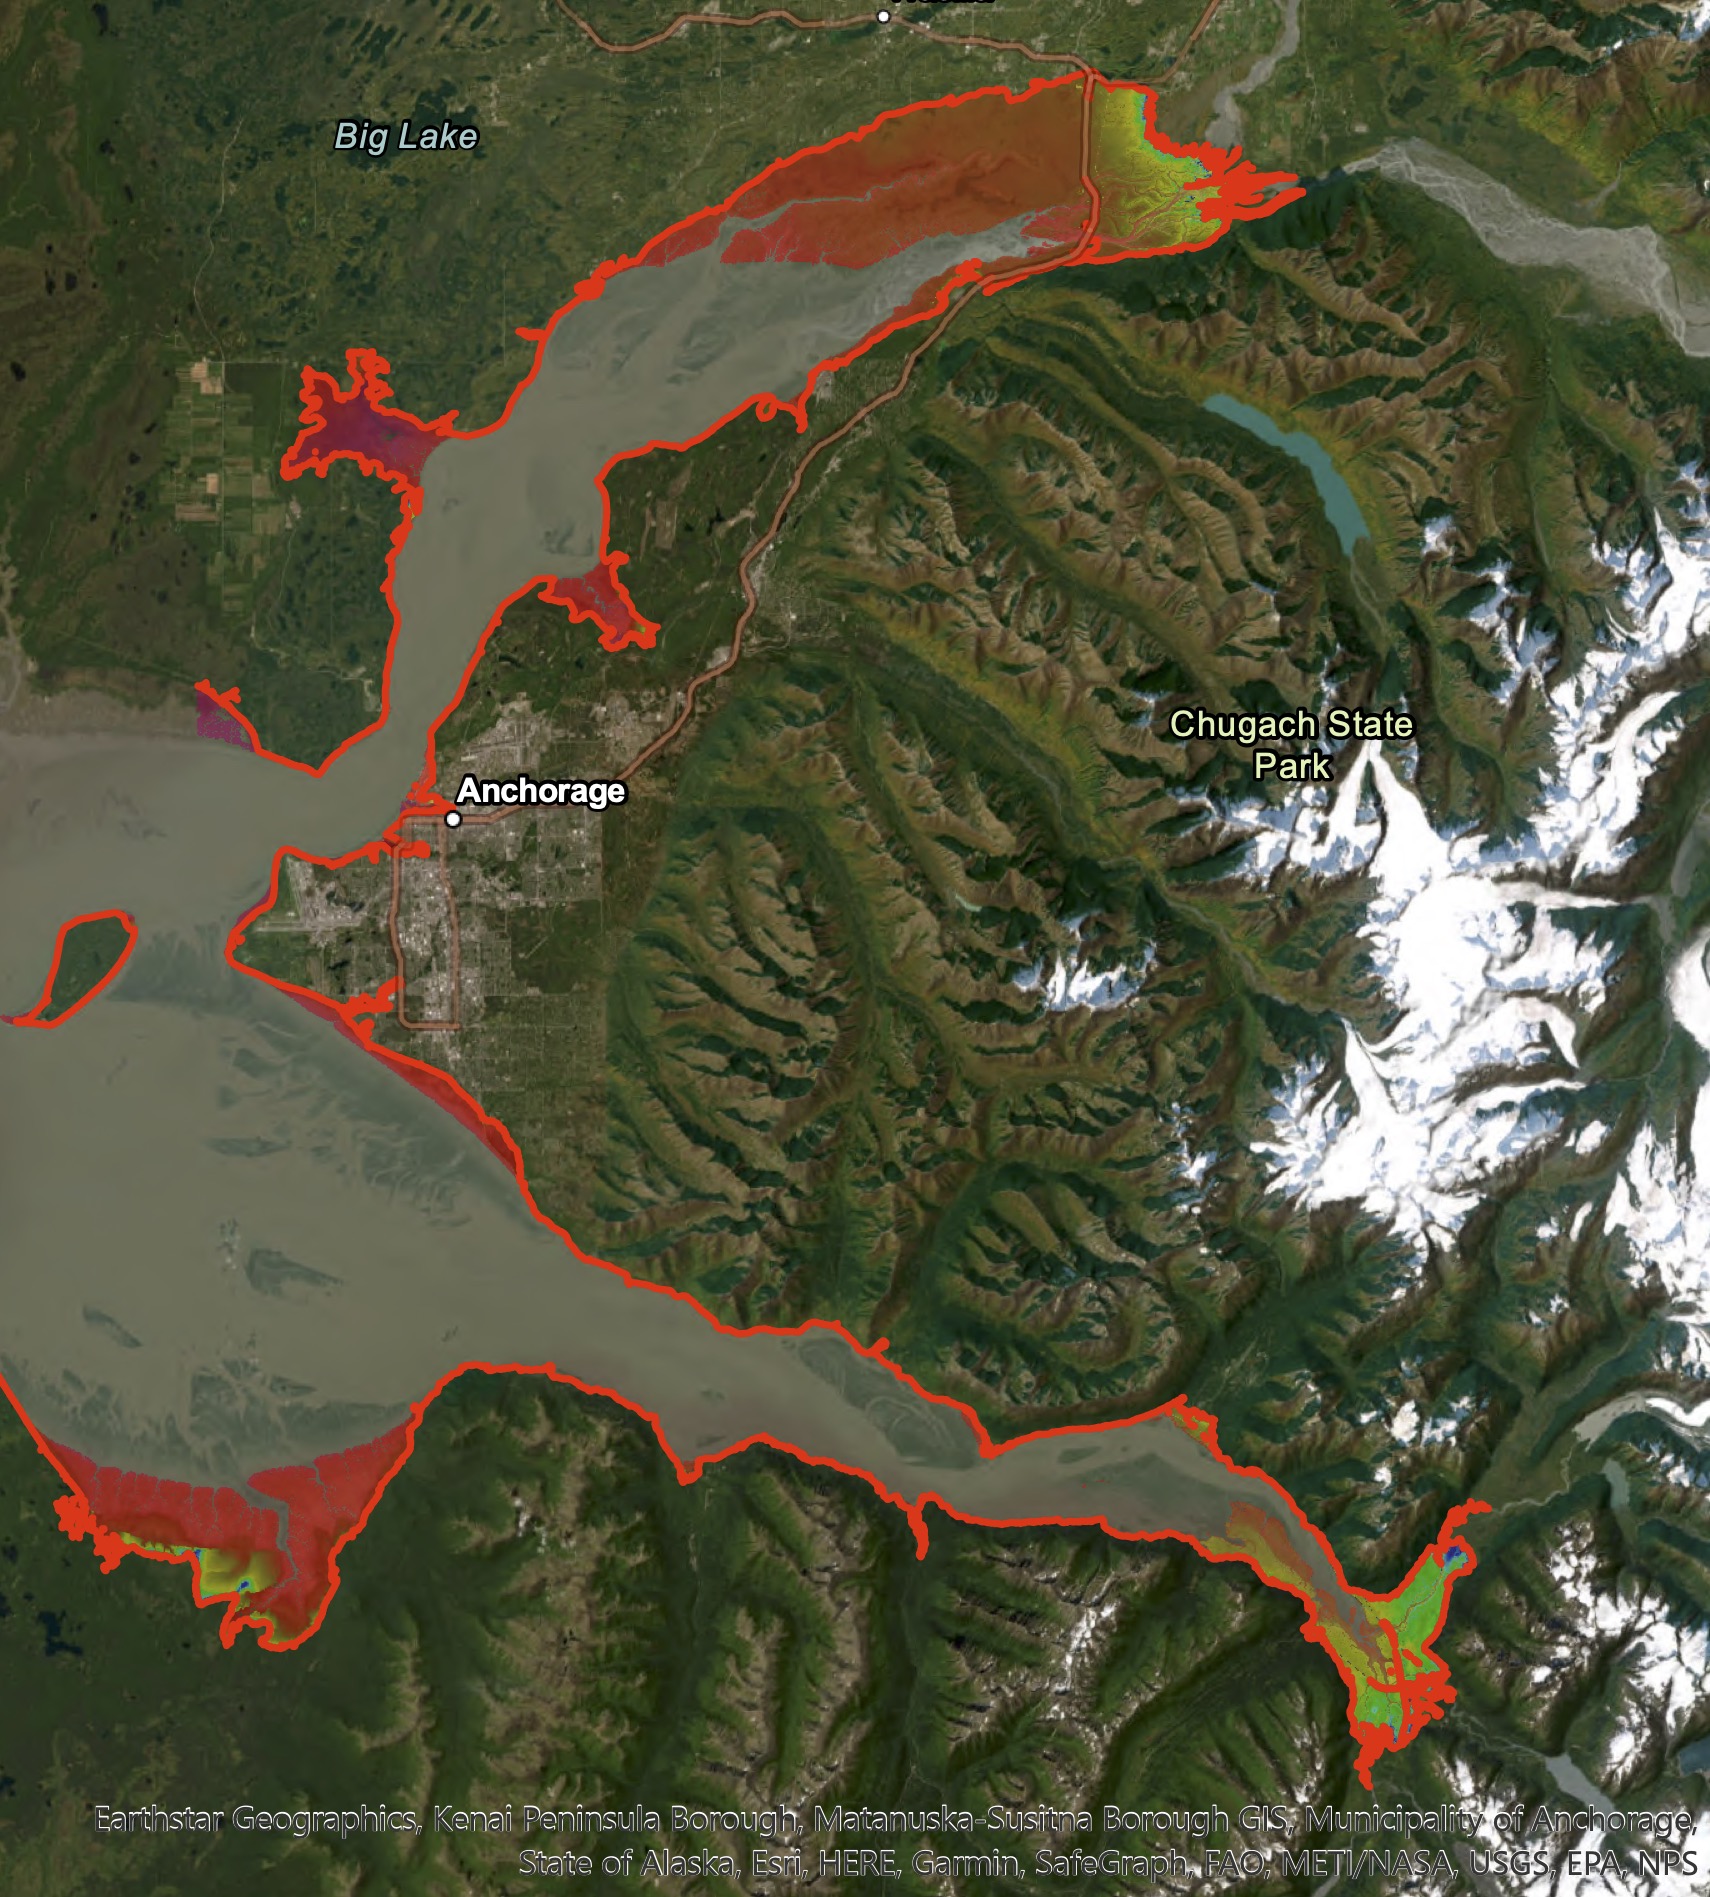 Map showing flooding extent in Anchorge area, Knik Arm, and Turnagain Arm.